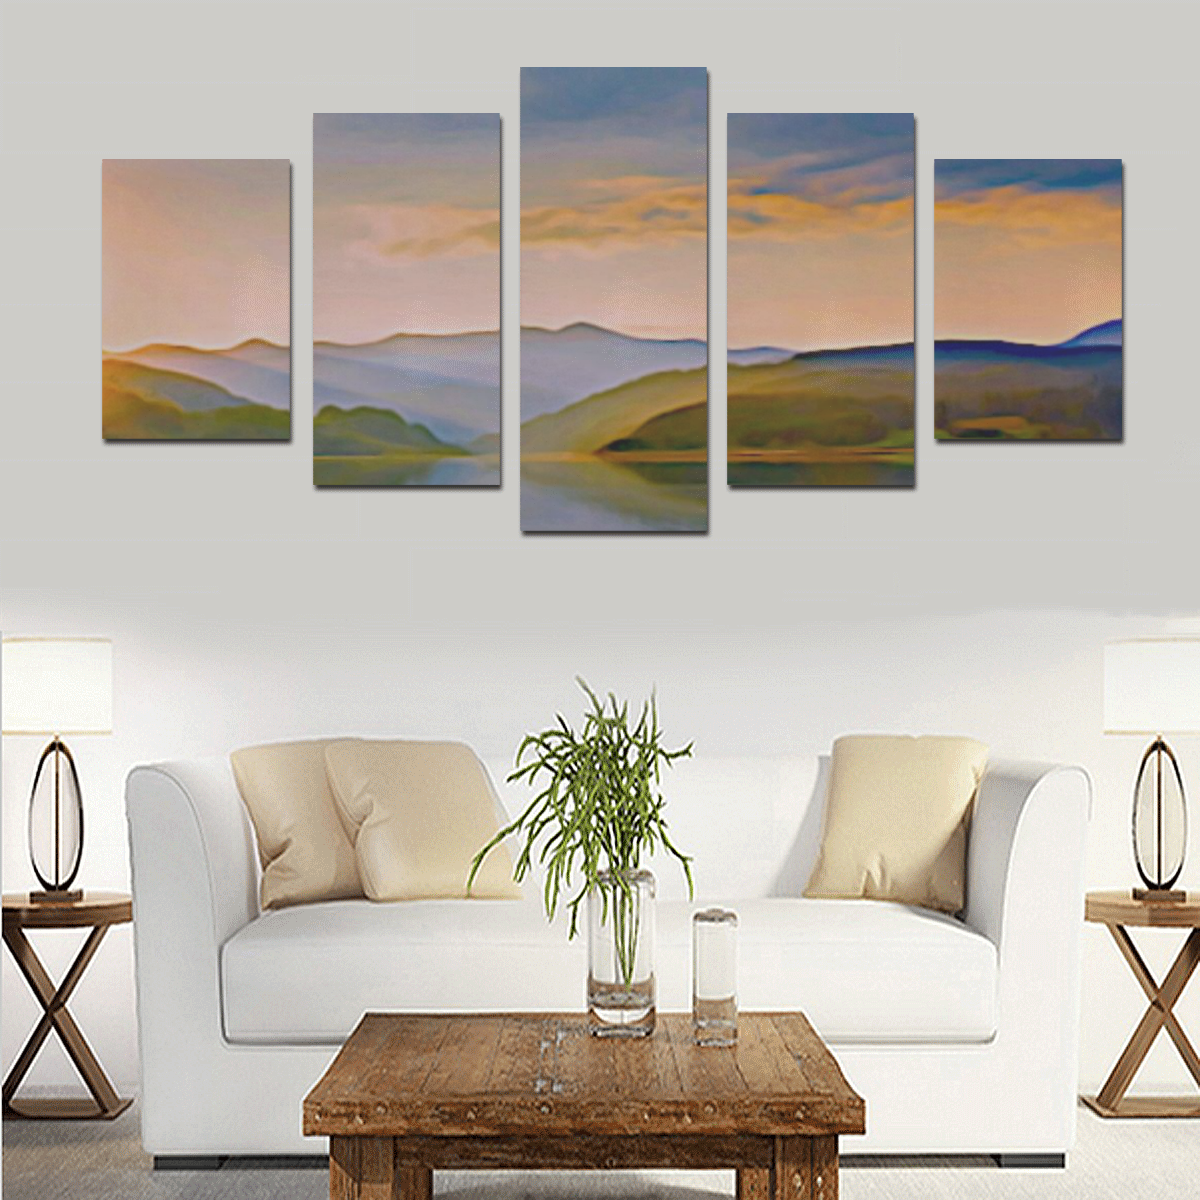 Travel to sunset 01 by JamColors Canvas Print Sets D (No Frame)